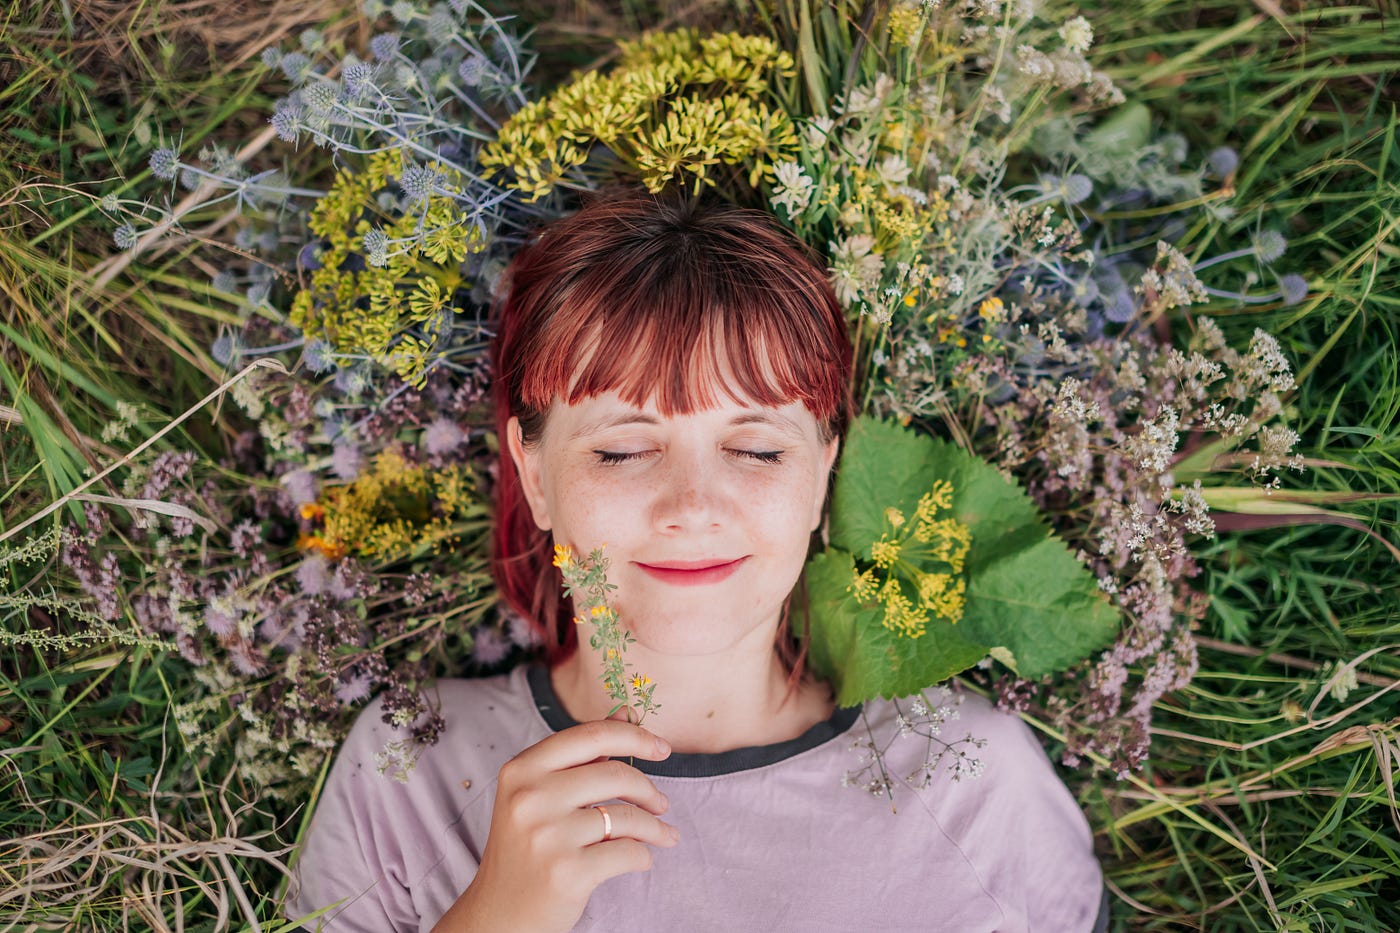 A young, redhead, freckled woman with a peaceful smile laying in a pile of flowers, eyes closed and a flower in hand.